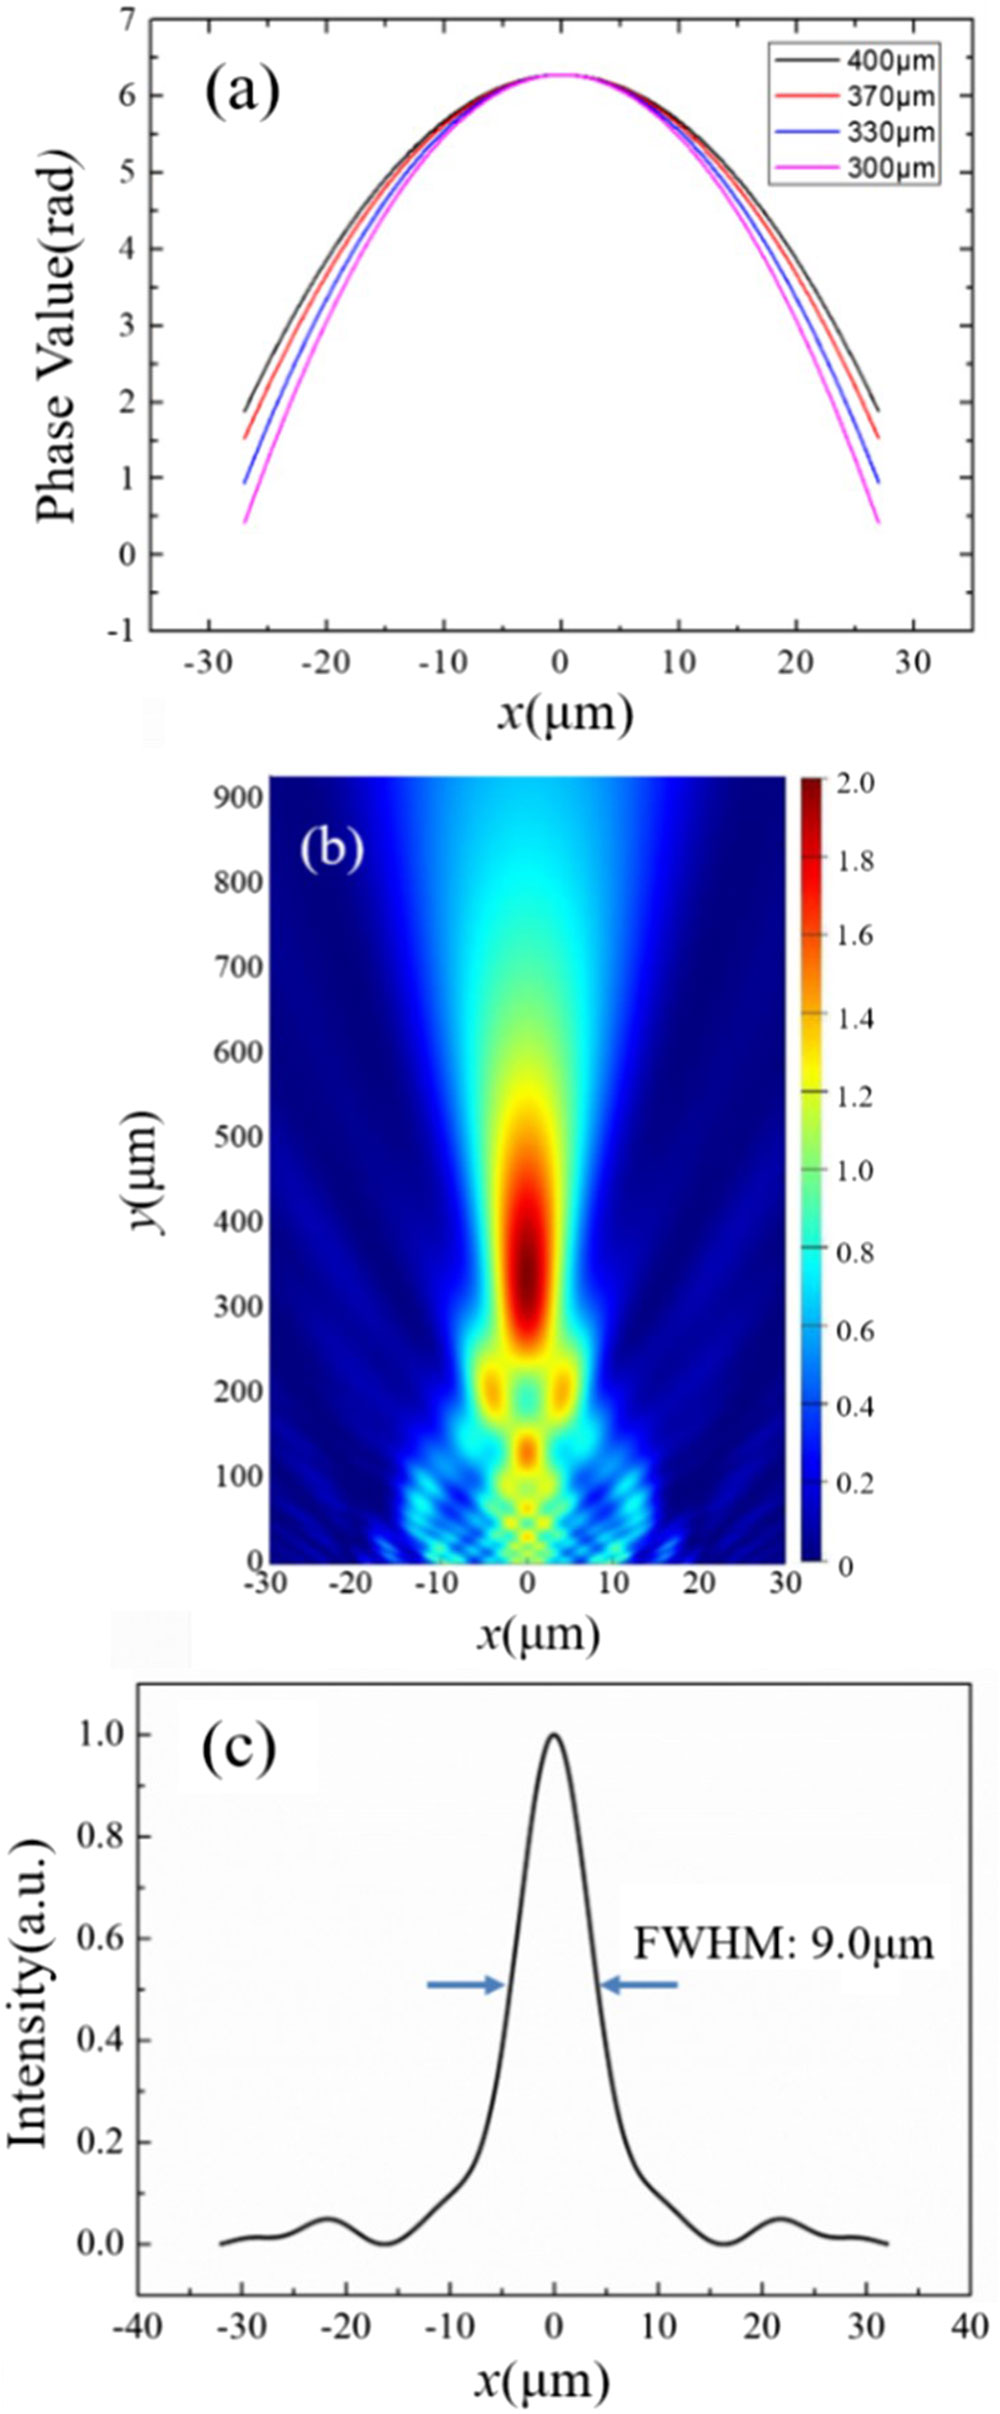 (a) Phase distributions for different focal lengths (1300 nm). (b) The field intensity distribution of the fiber-tip lens with the focal length of ∼309 μm. The color bar indicates the electric field intensity. (c) Normalized electric field intensity distribution of the fiber-tip lens along the x axis at the focal plane (y=309 μm). The FWHM is 9.0 μm.